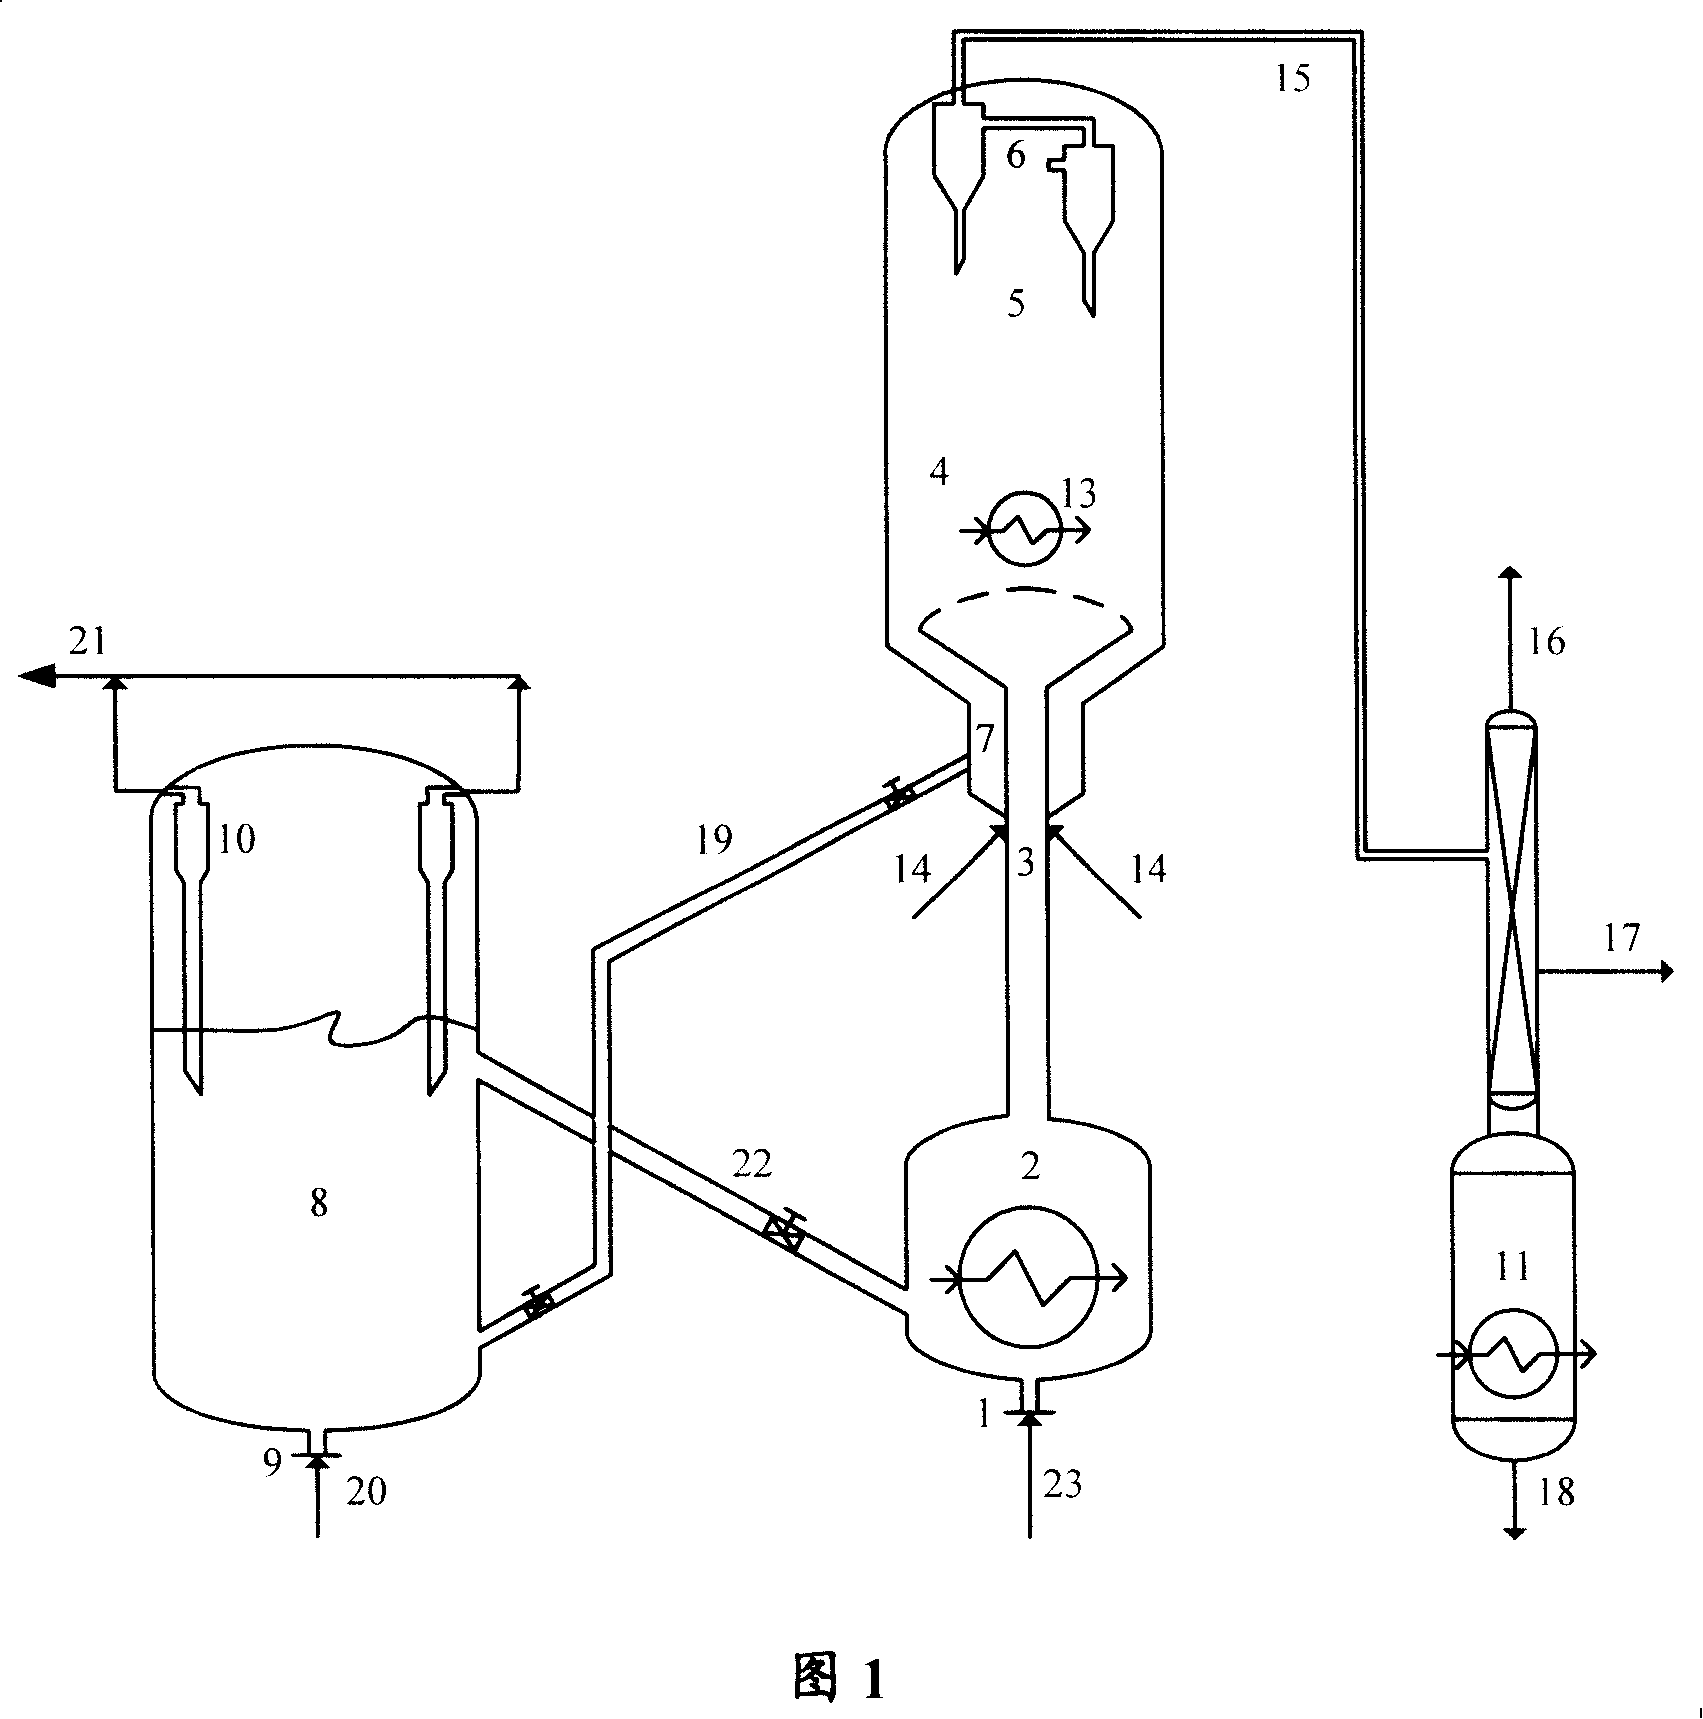 Liquefaction catalytic conversion method for producing dimethyl ether with methanol